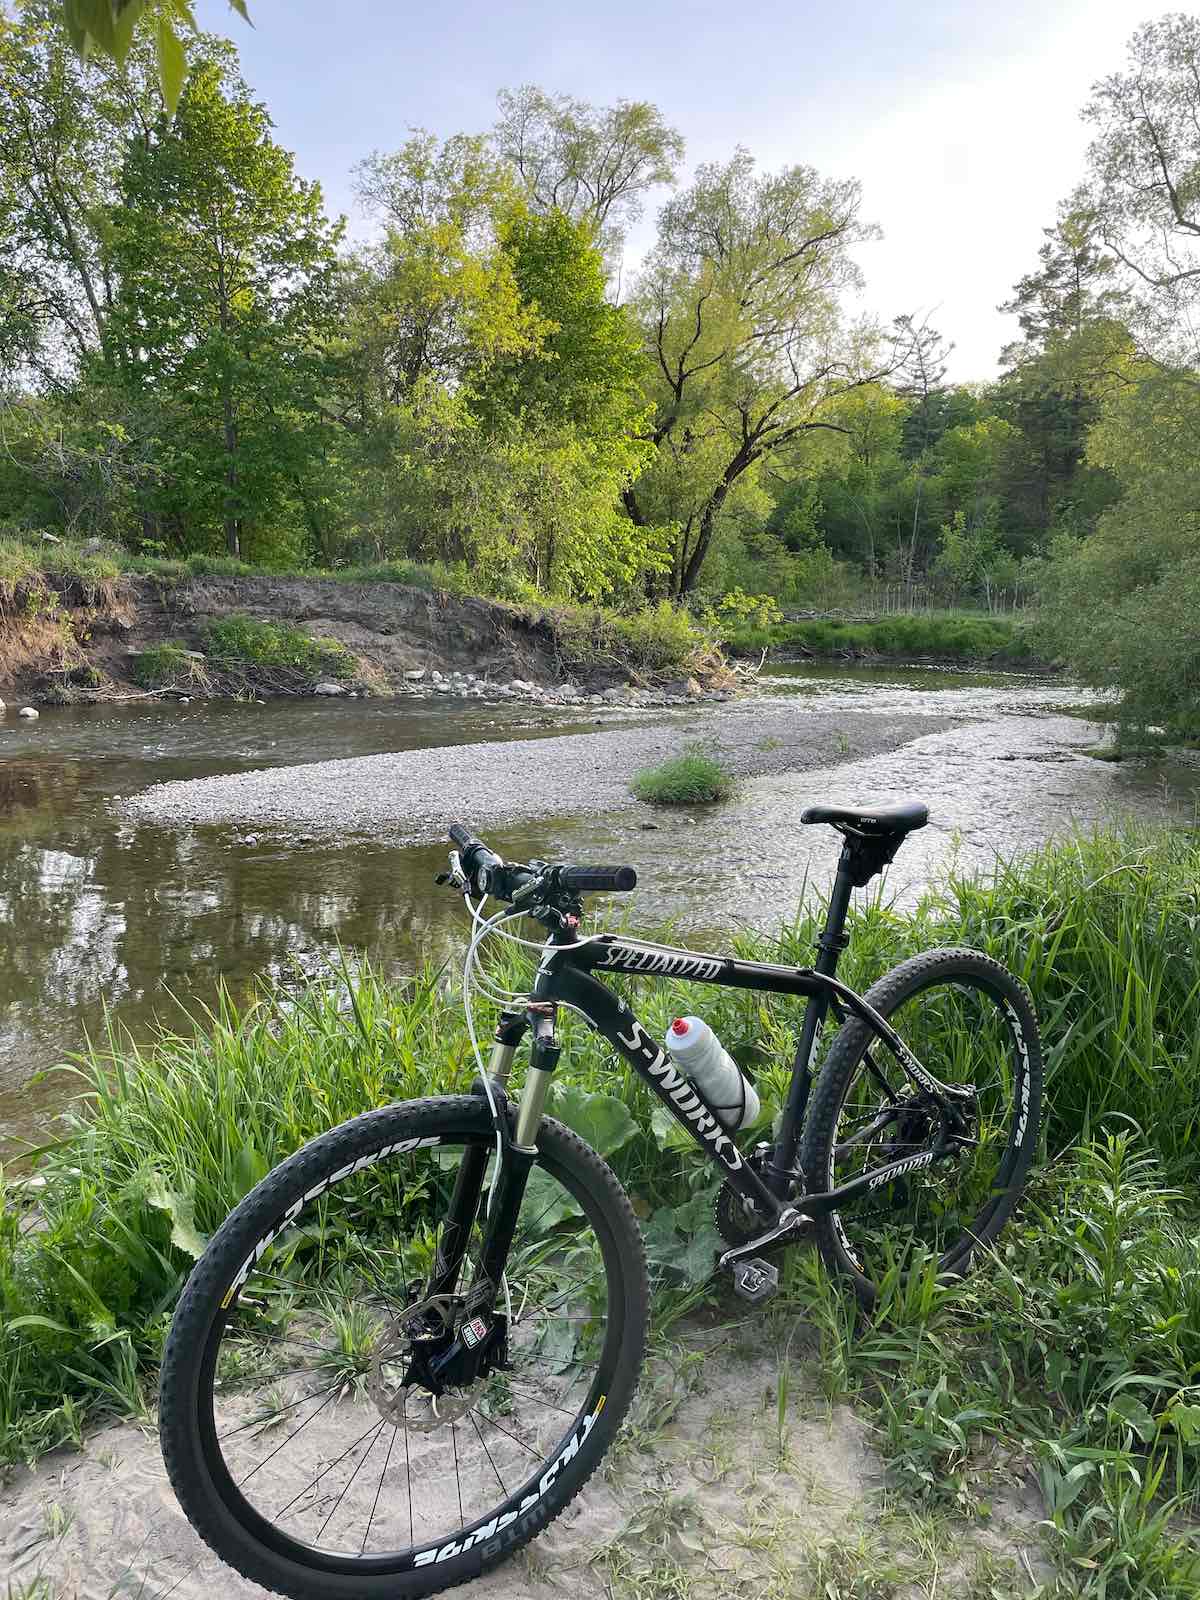 bikerumor pic of the day a bicycle is along a small river or stream surrounded by tall grass